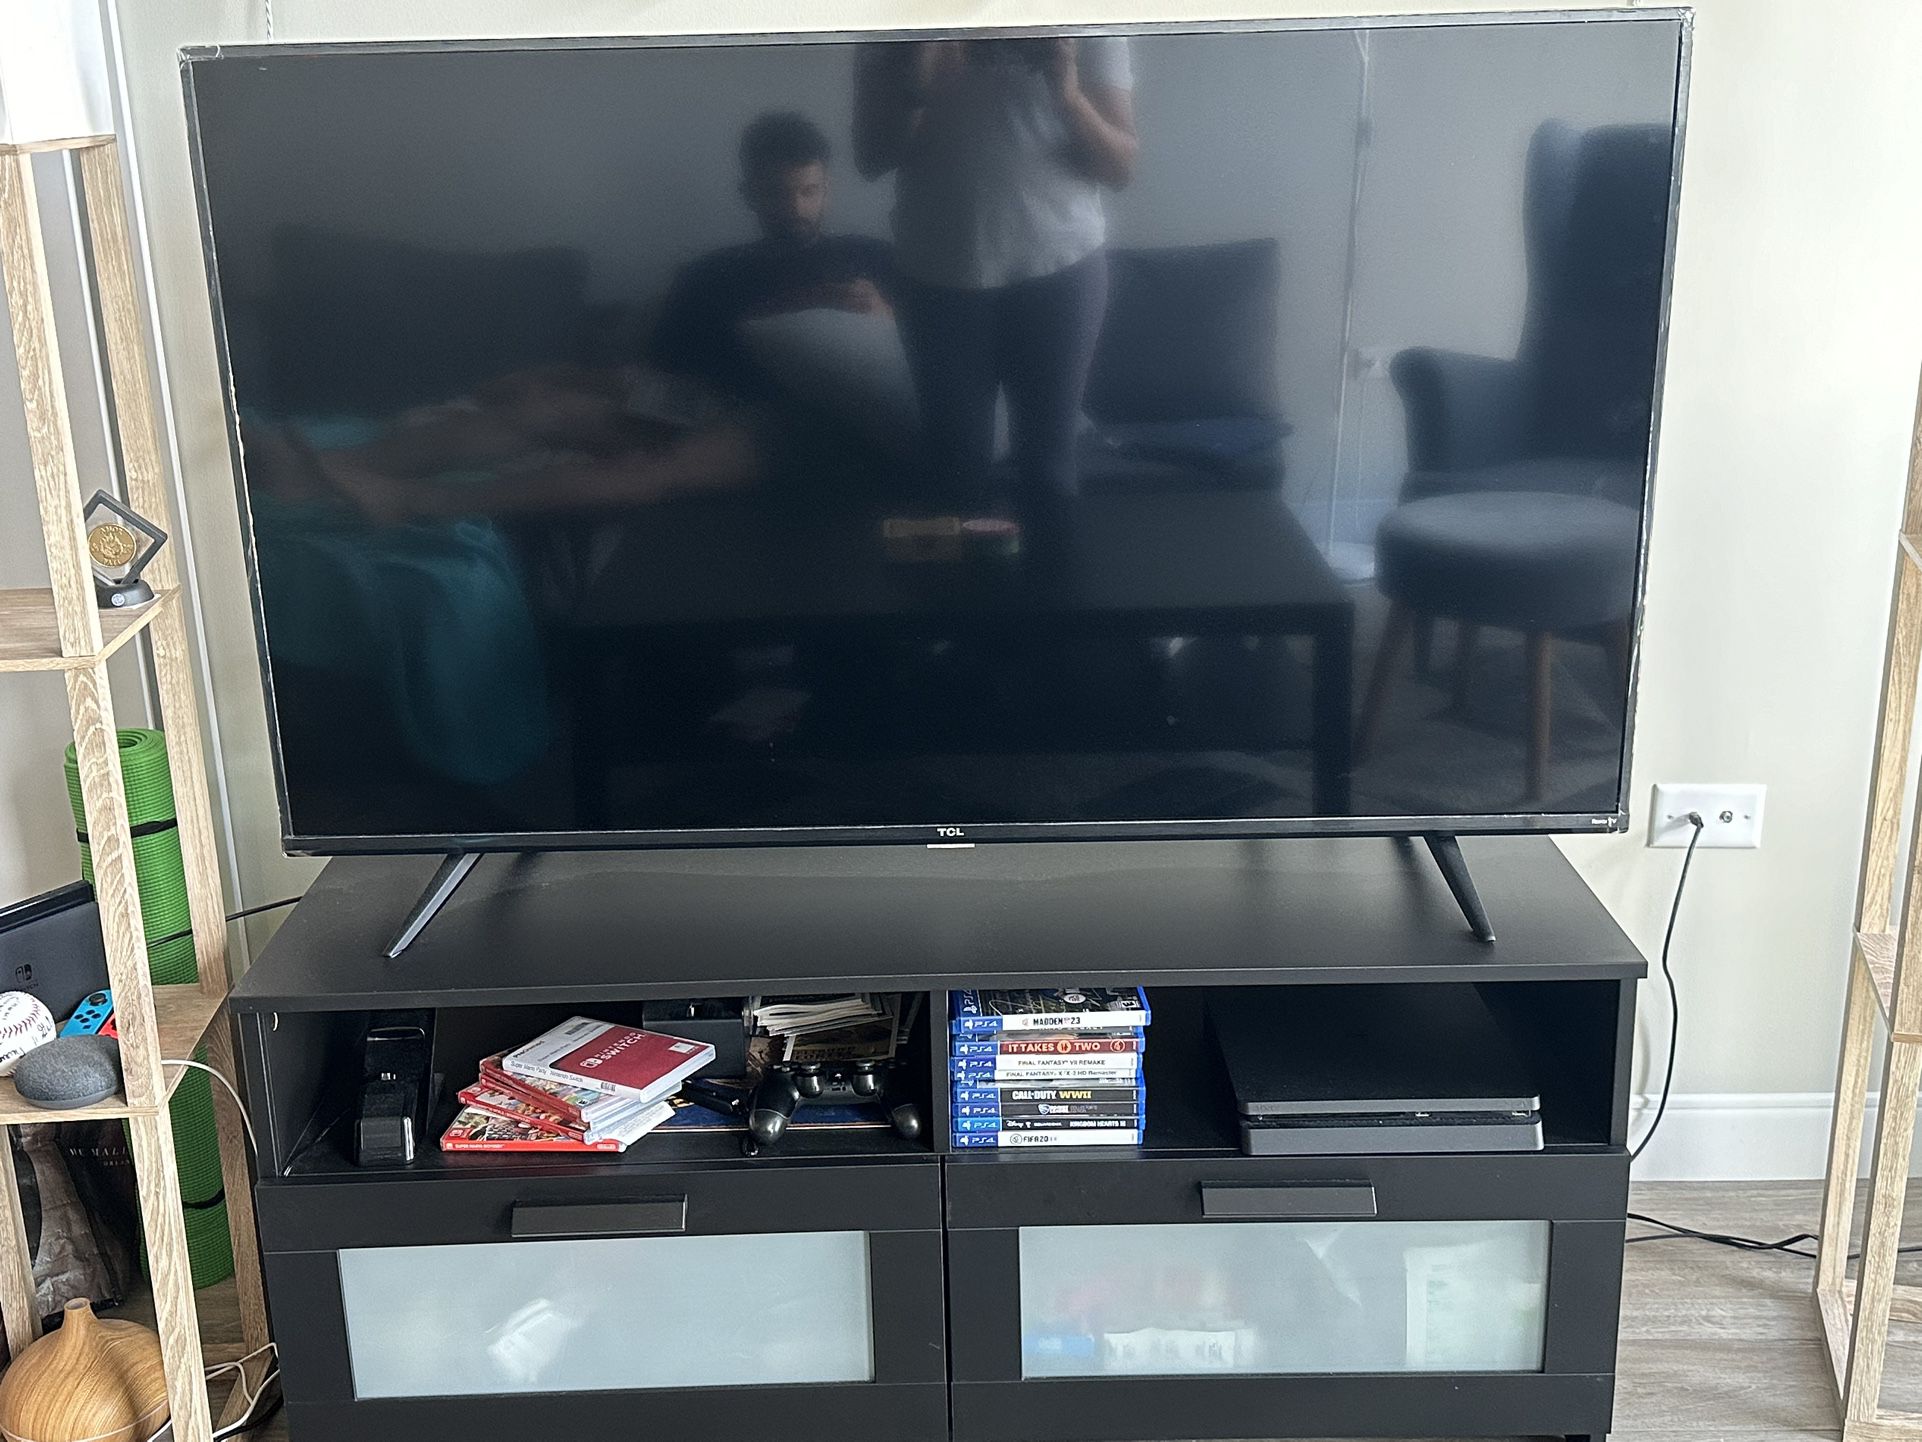 55 in. TCL TV+IKEA TV Stand